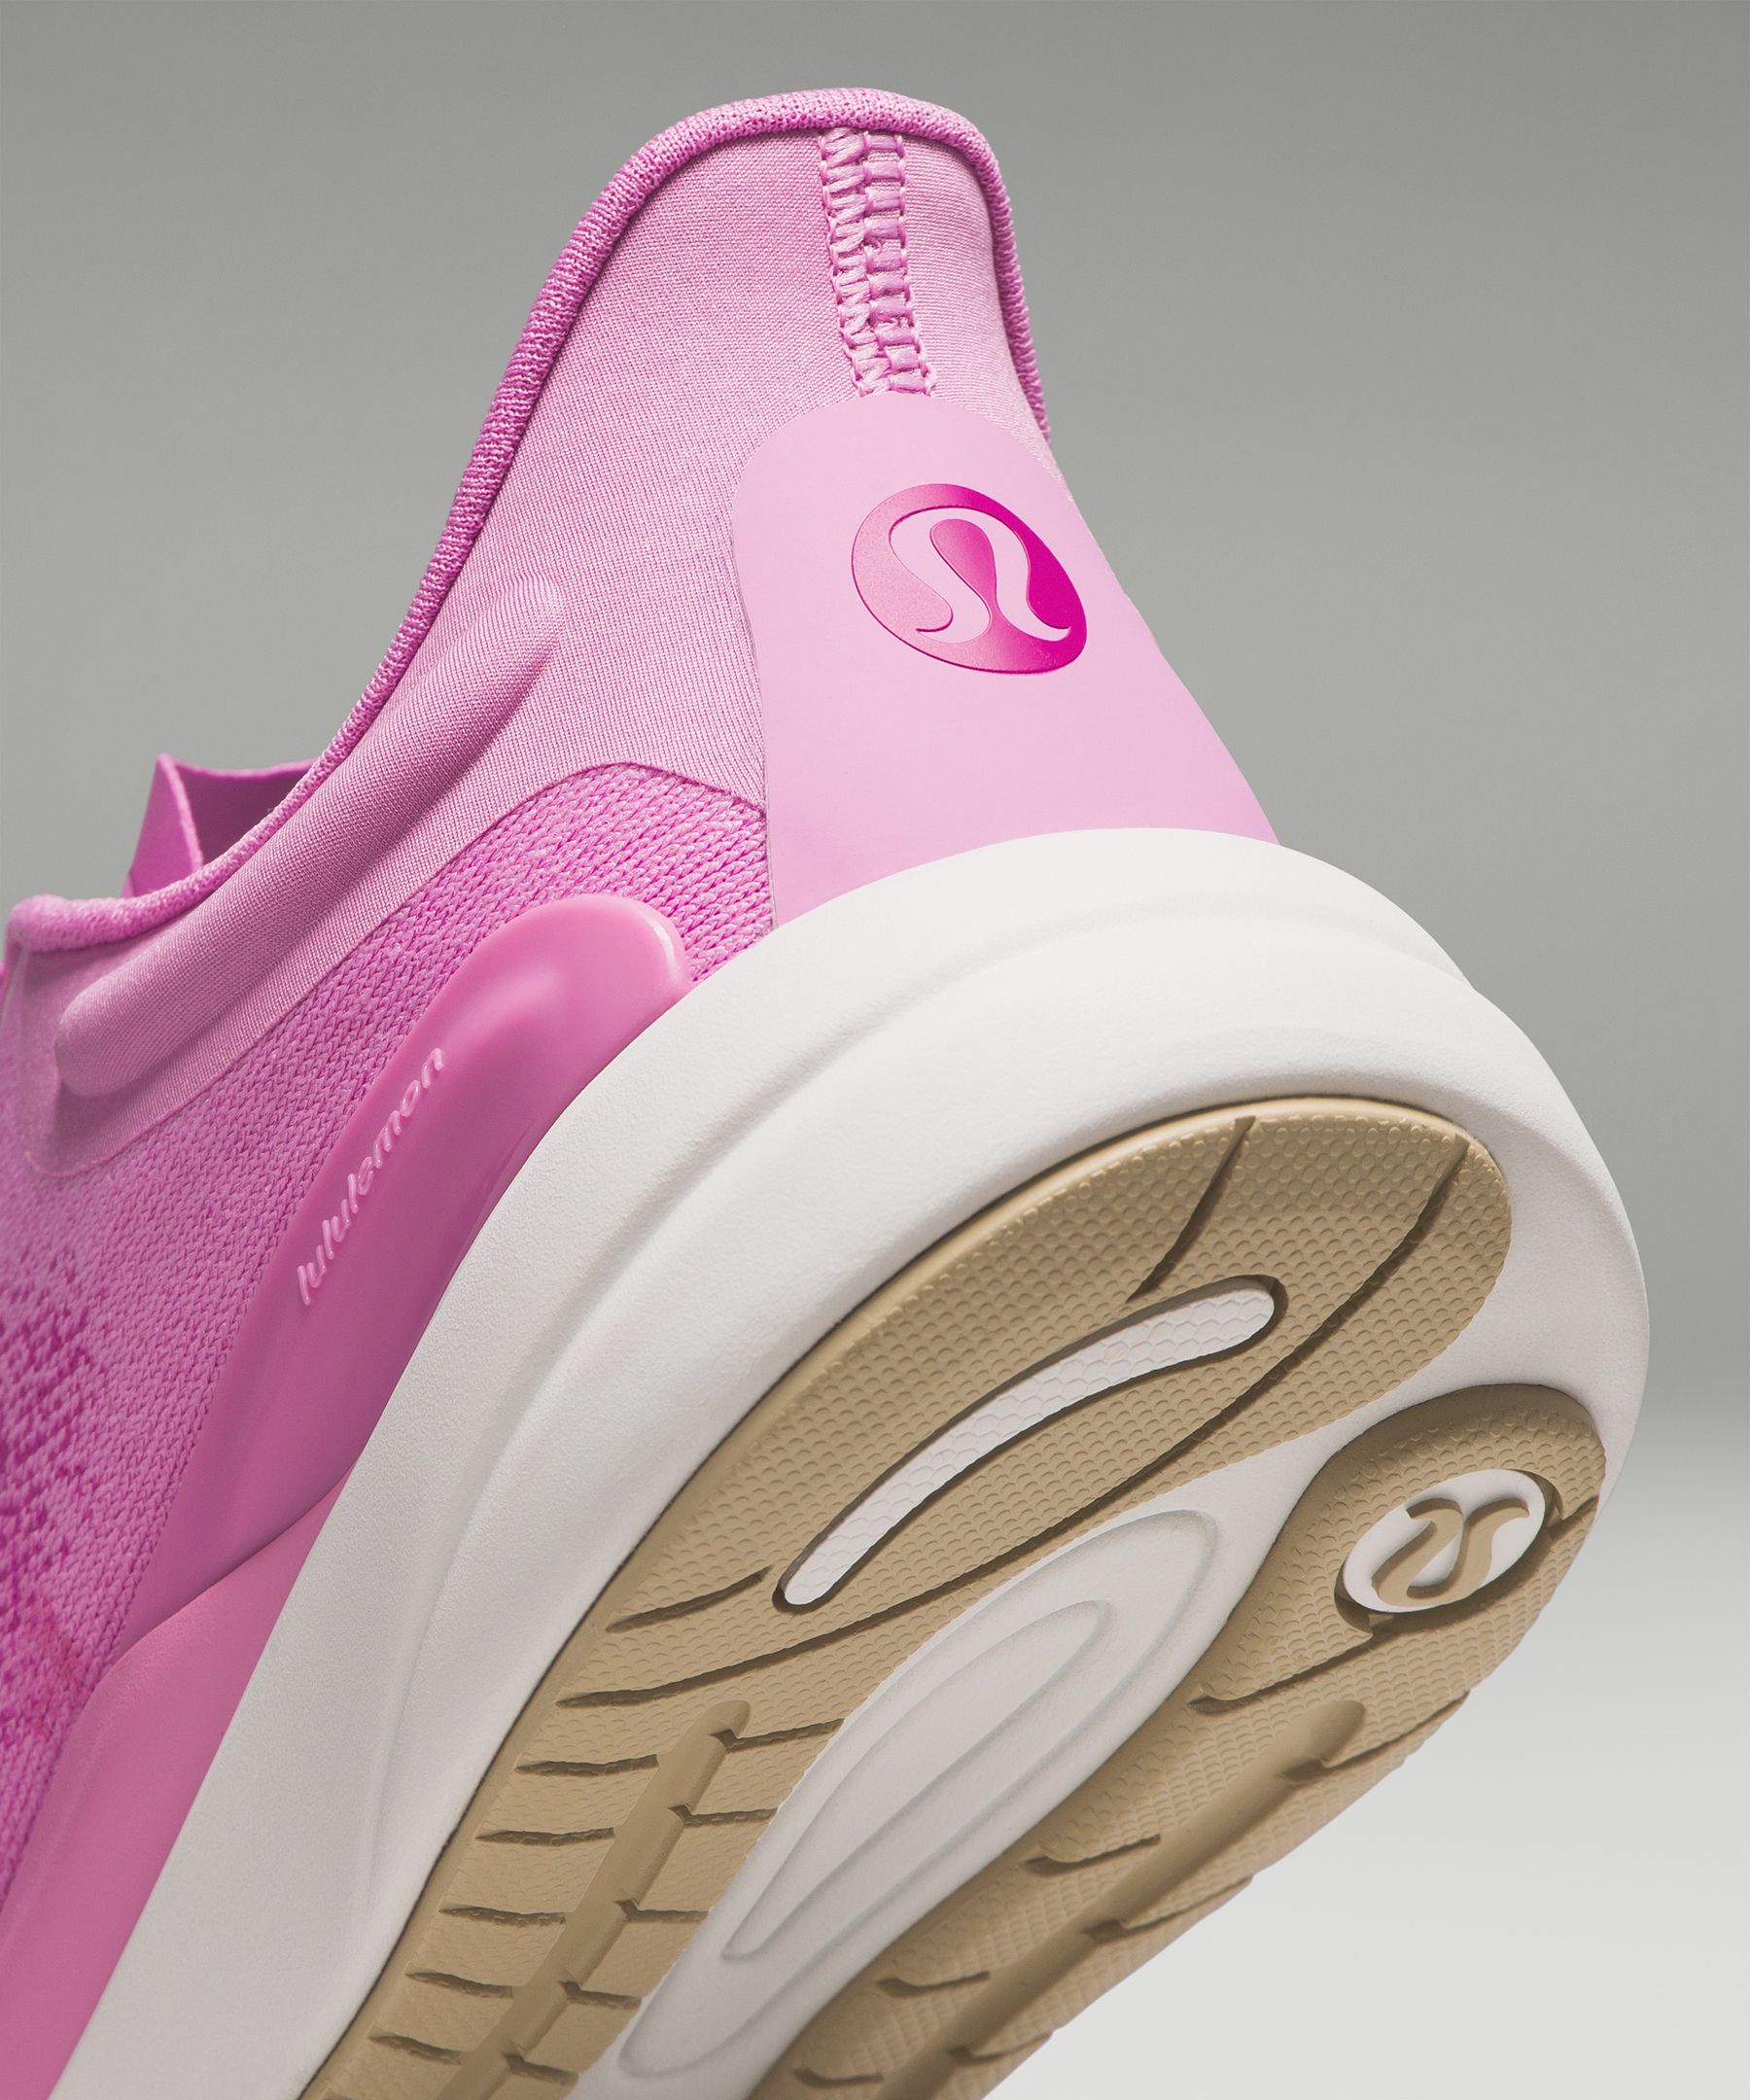 Pink lululemon athletica Shoes for Women